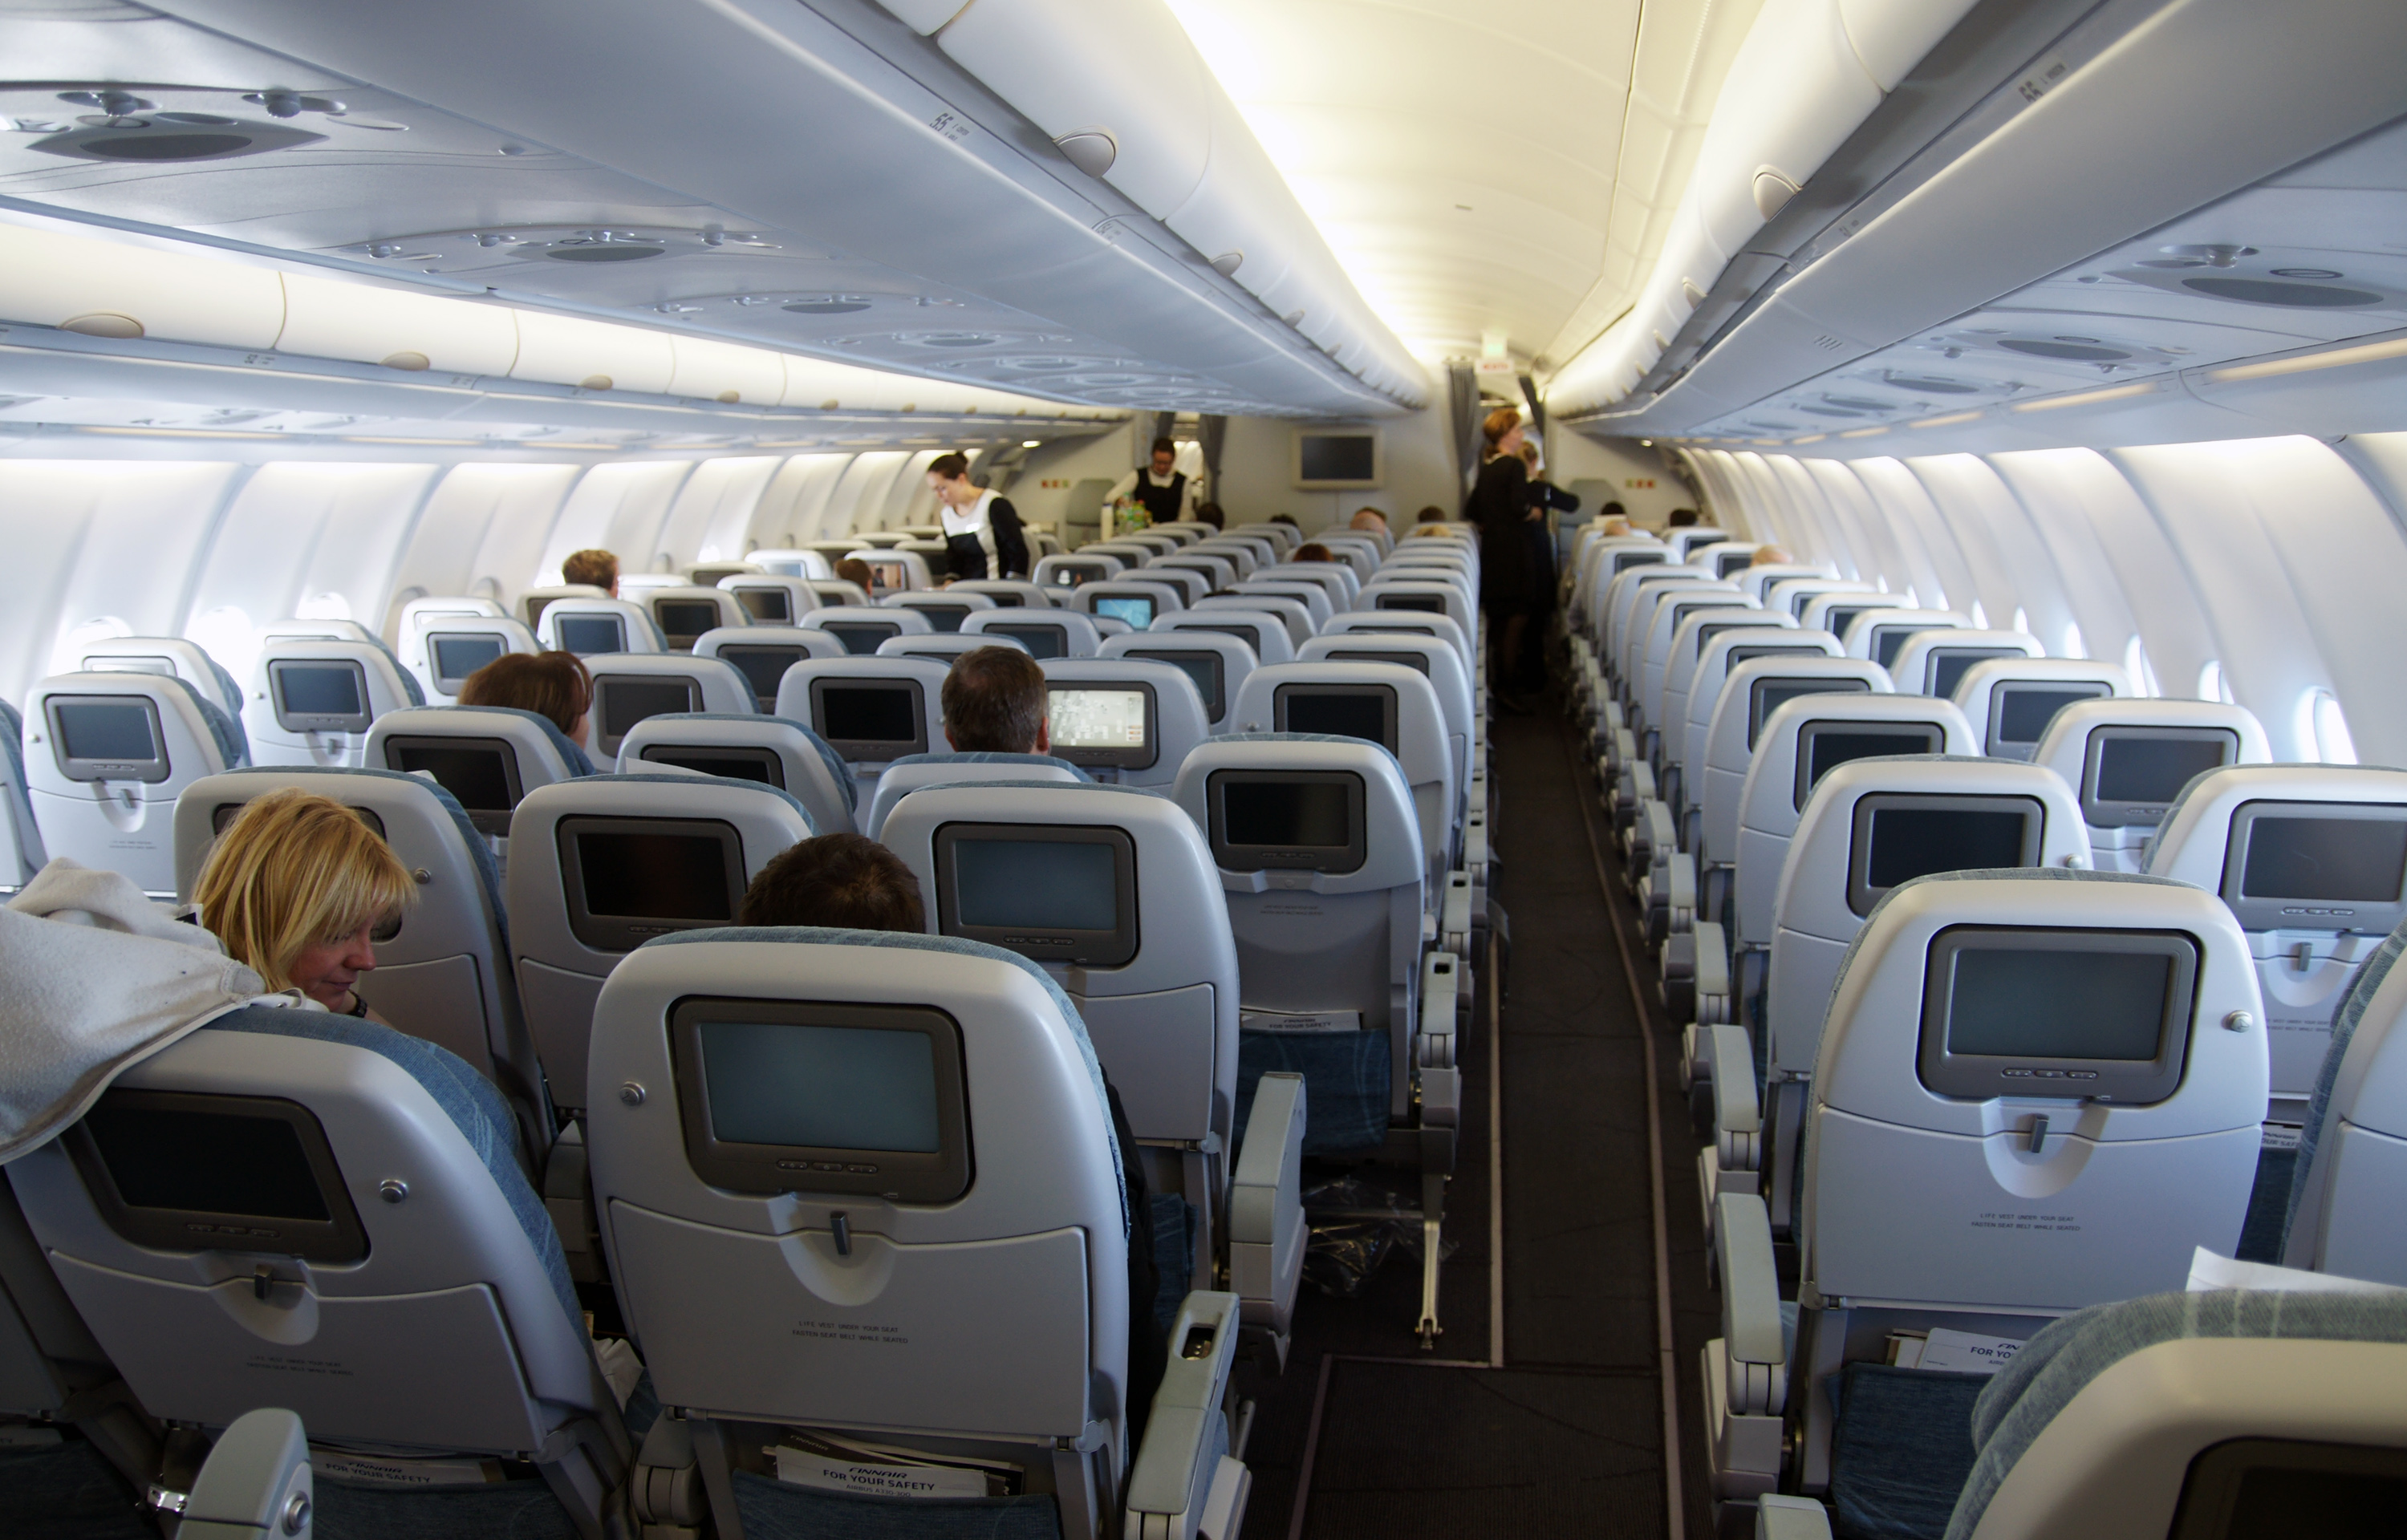 Airbus A330-300 inside